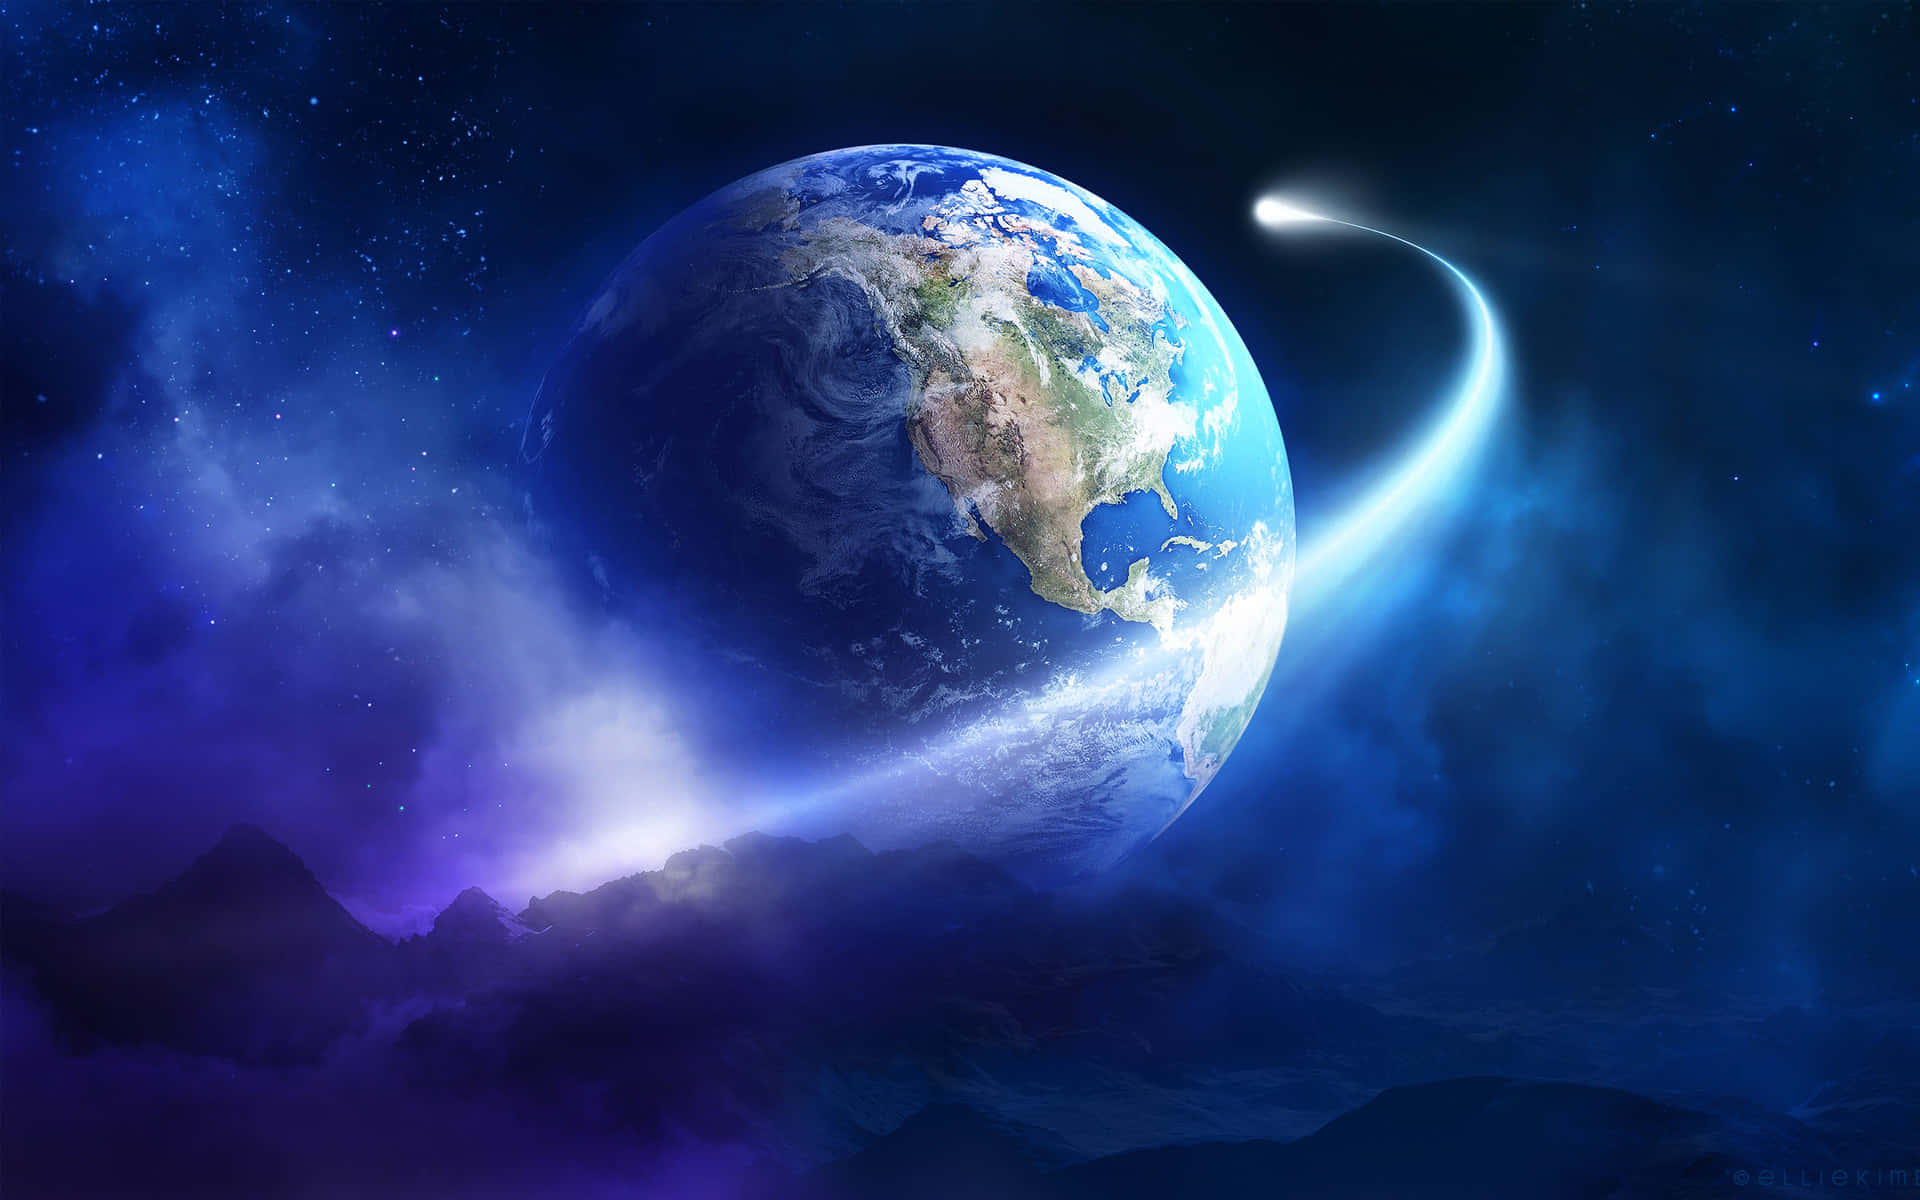 An awe-inspiring image of planet Earth, our shared home. Wallpaper